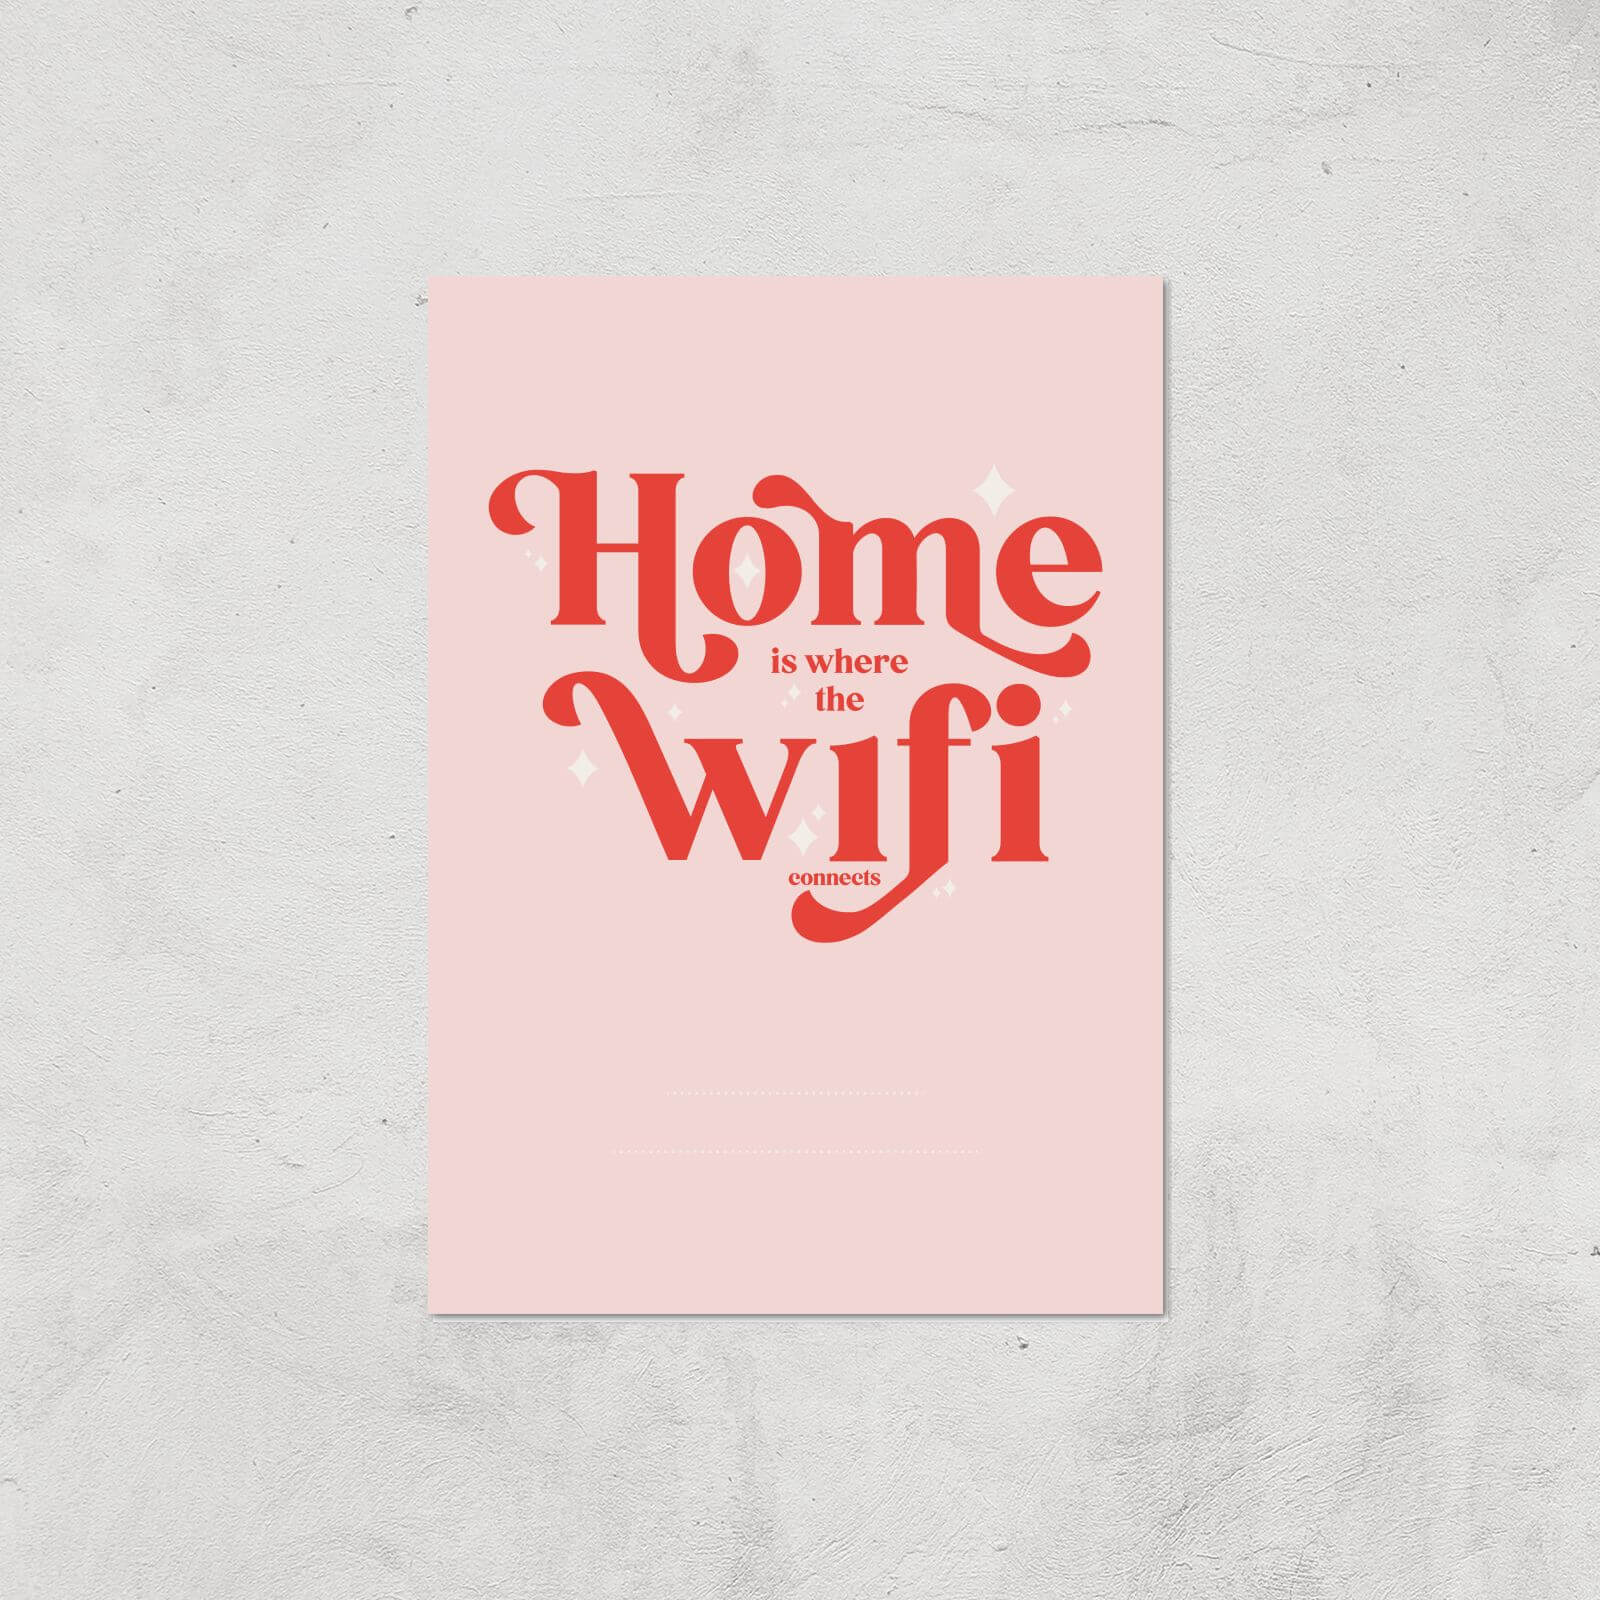 Hermione Chantal Light Home Is Where The Wifi Is Giclee Art Print - A4 - Print Only